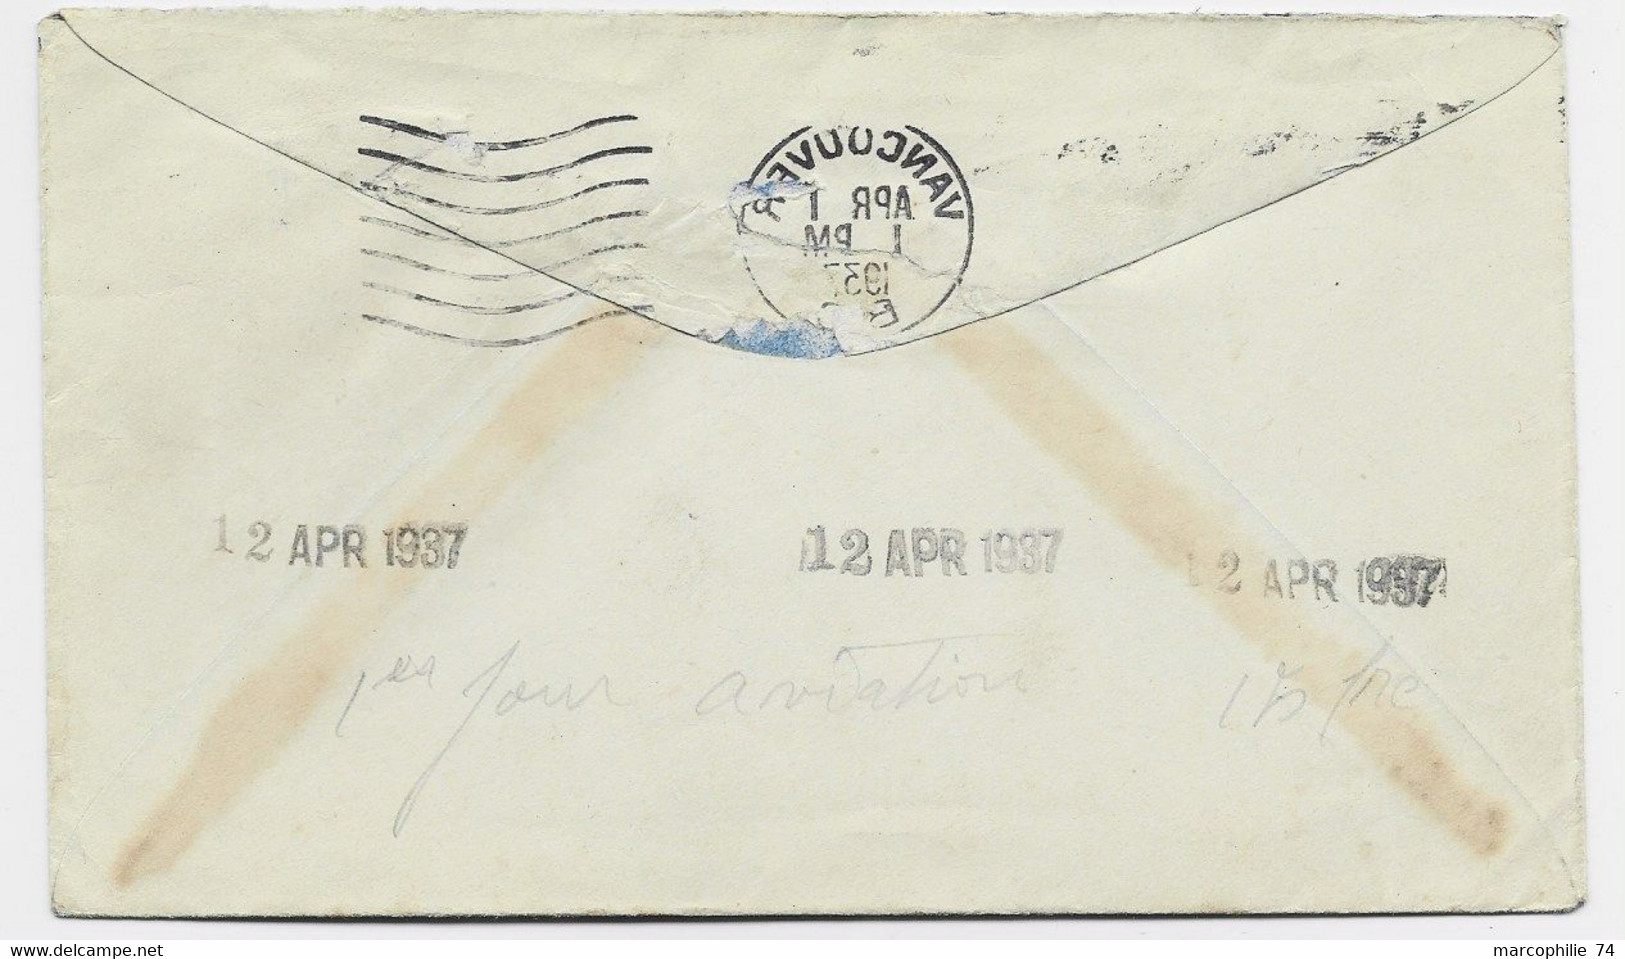 CANADA 3C PAIRE LETTRE COVER FDC VANCOUVER APR 1 1937 BC AIR MAIL TO ENGLAND - Briefe U. Dokumente